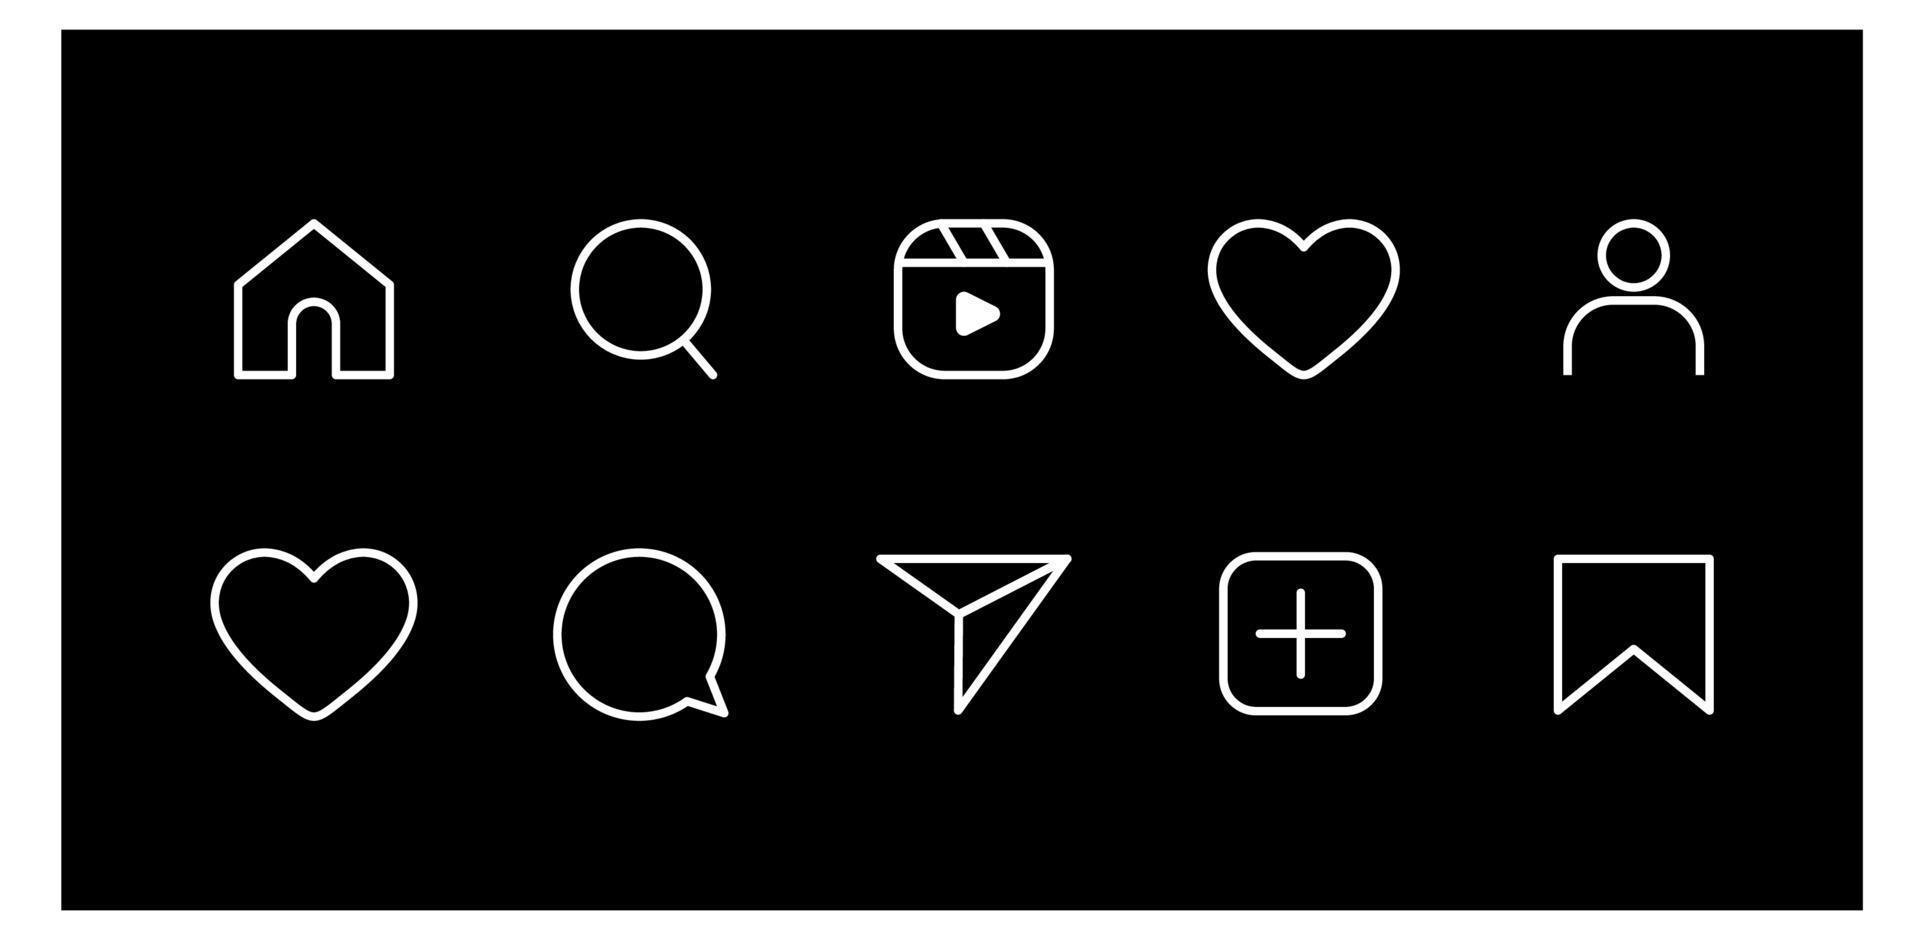 social media flat icons set notification speech bubble for like share save comment buttons Camera Search Heart Home web symbols and icons Free Vector